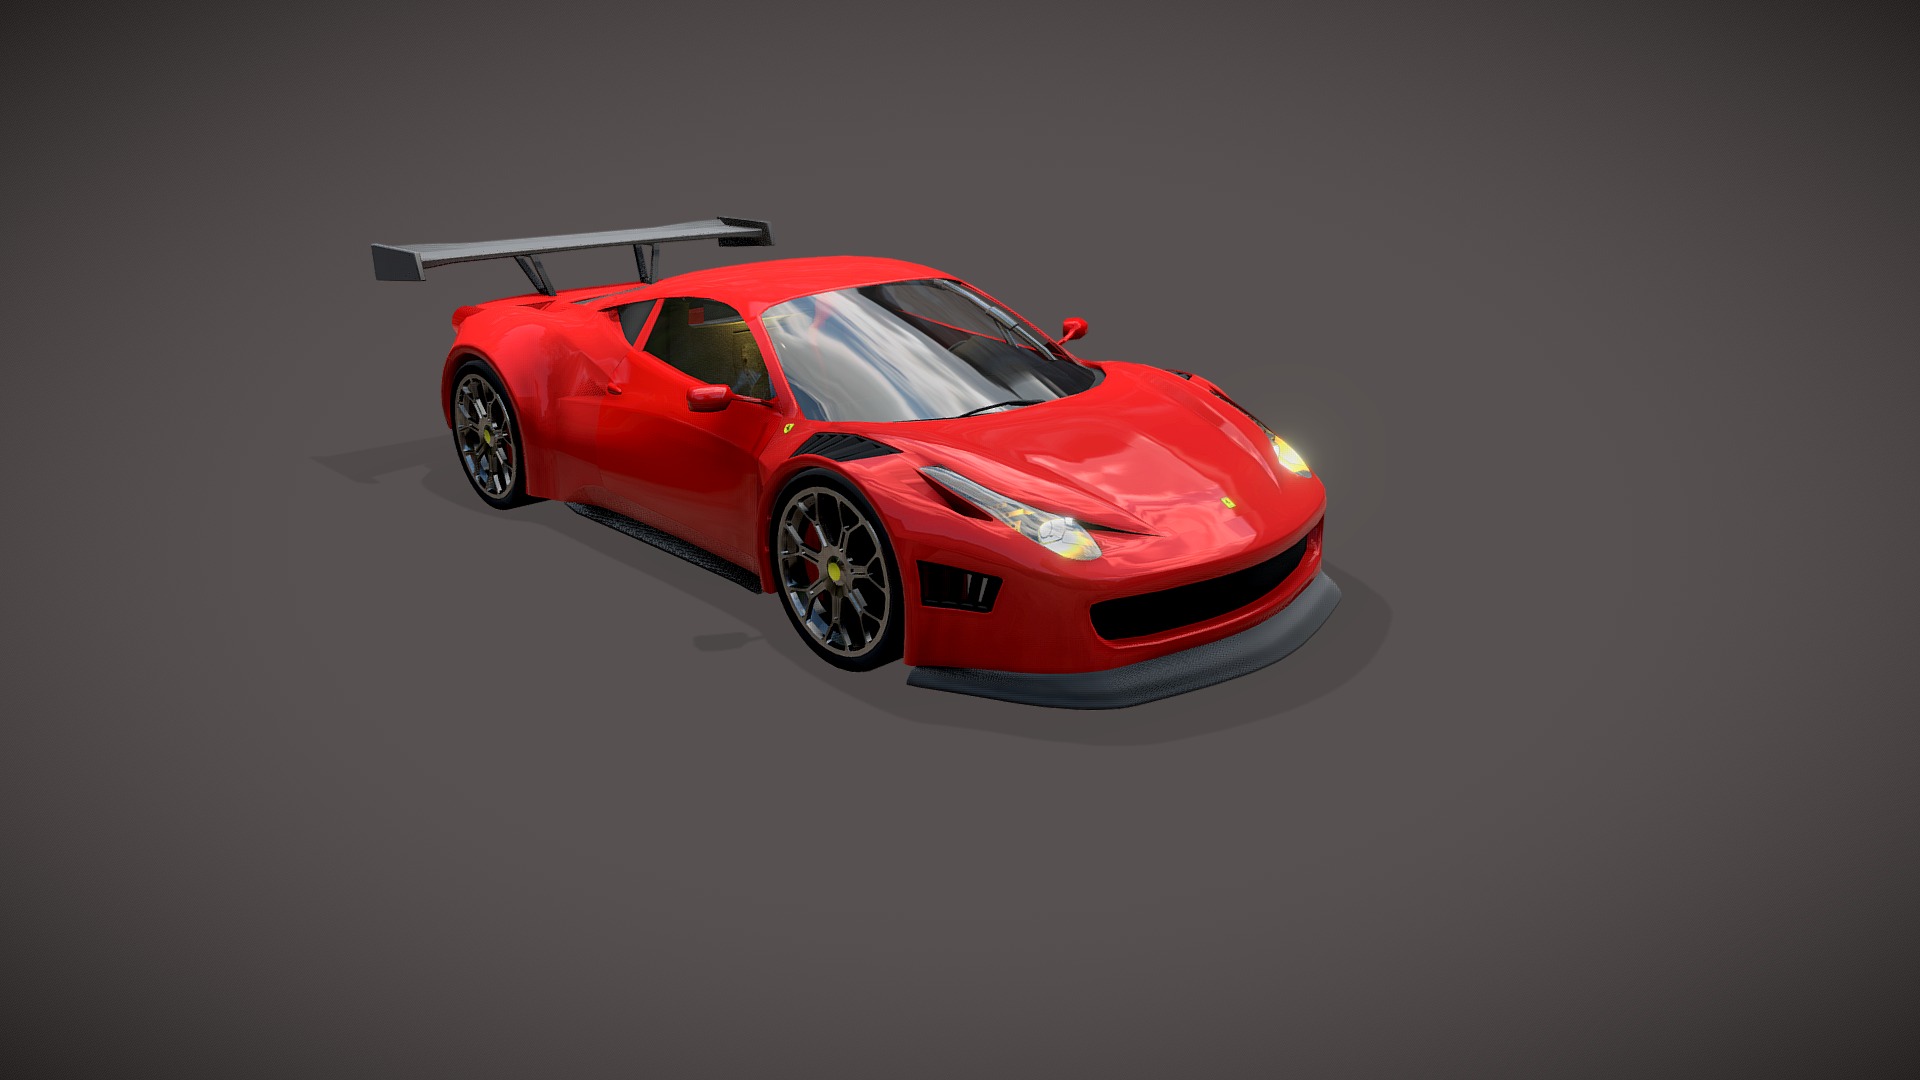 3D model Ferrari 458 Italia (Animated) - This is a 3D model of the Ferrari 458 Italia (Animated). The 3D model is about a red sports car.